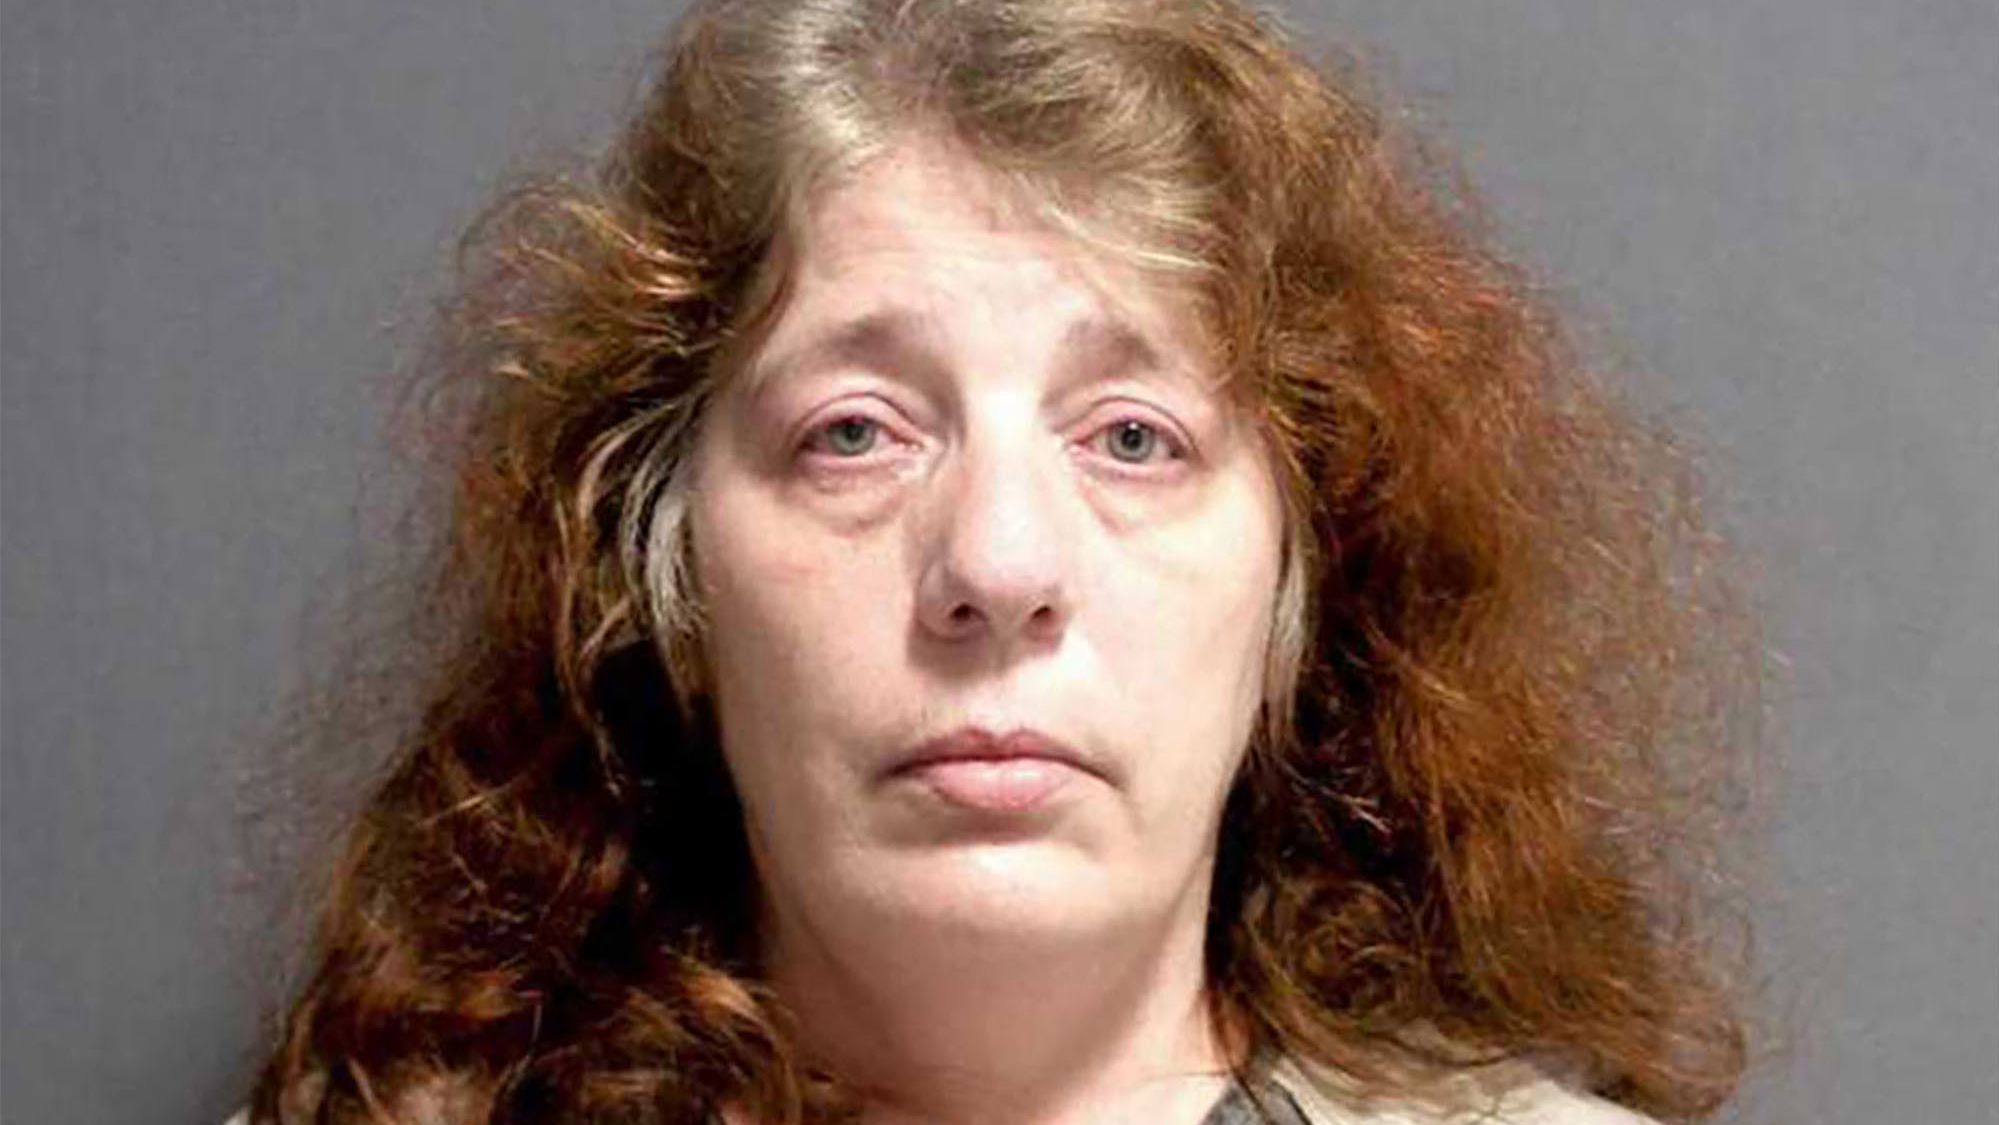 Wendy Wein was arrested last year and now faces up to nine years in prison.